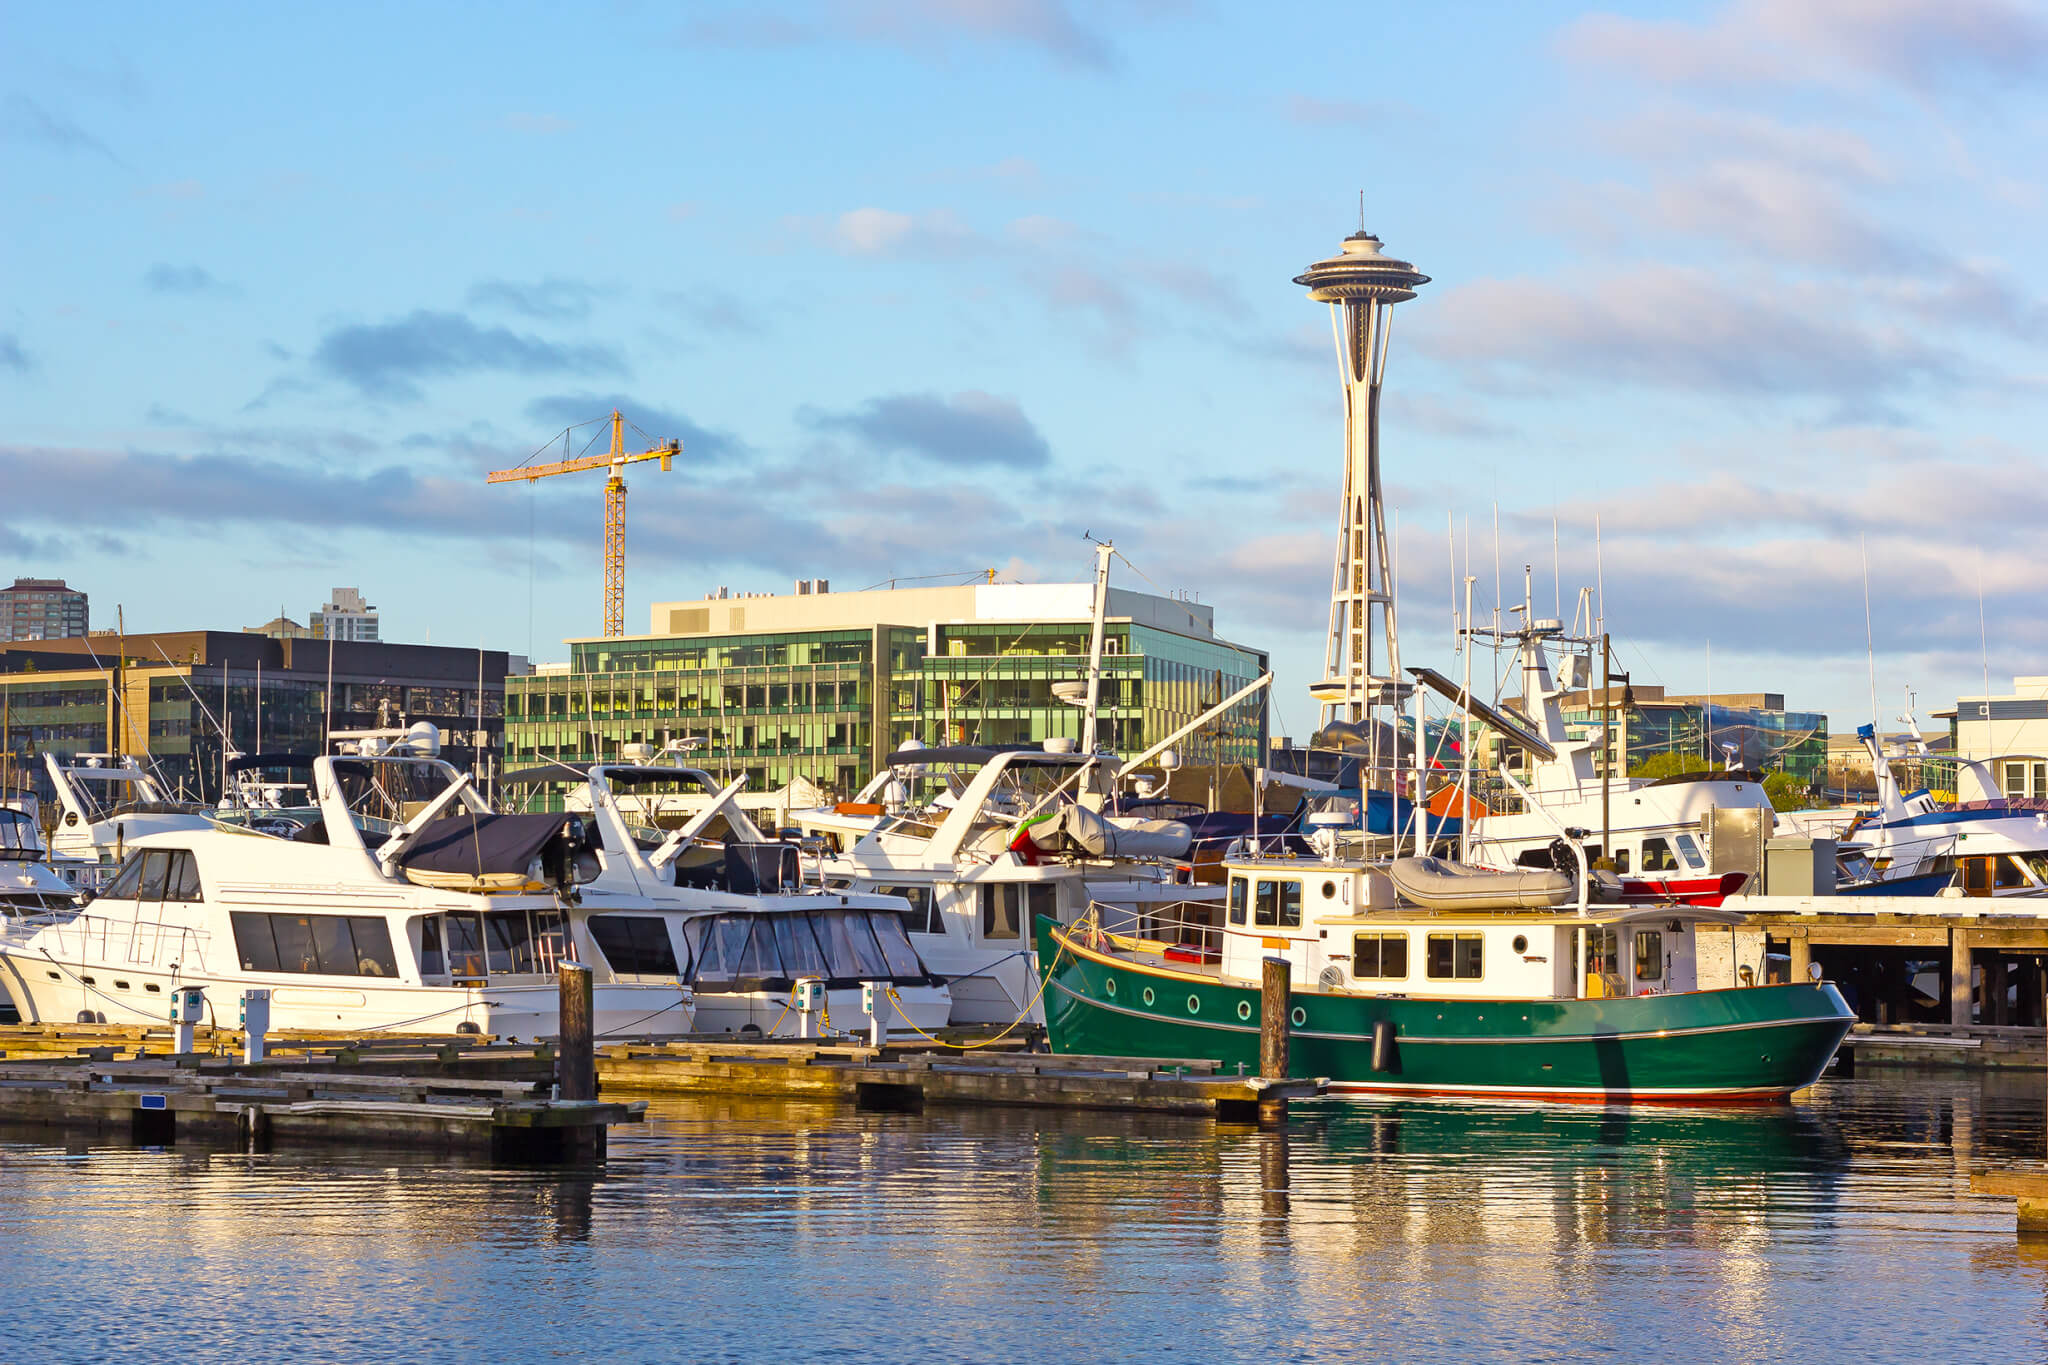 A view on Seattle Space Needle from the waters of Lake Union. A morning in Seattle downtown in the morning with yachts reflections in the lake.